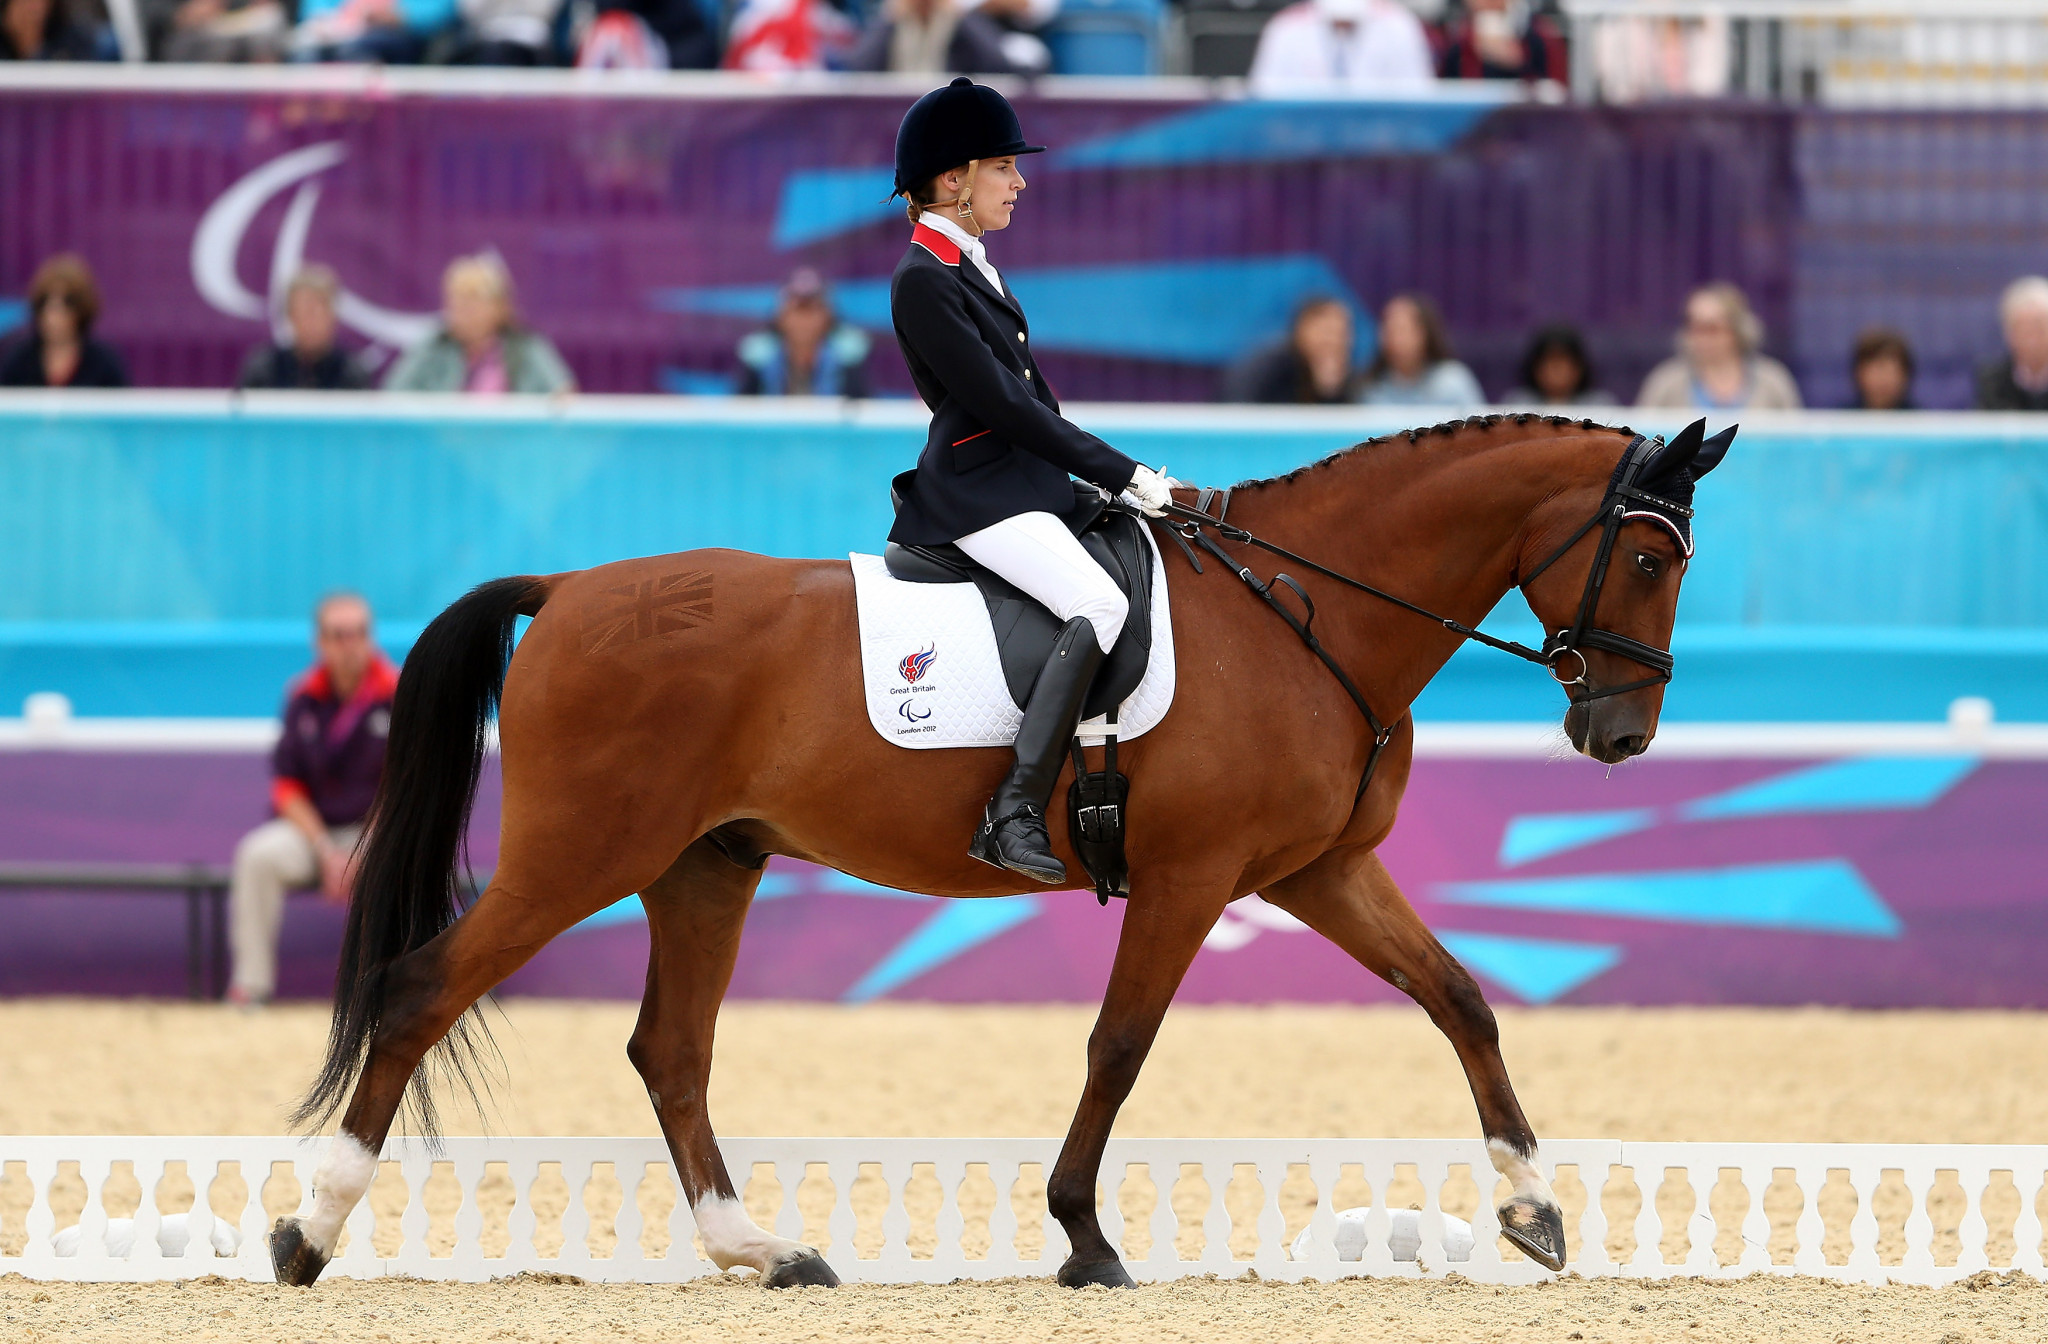 Britain's Sophie Christiansen has secured a new ride ahead of Para dressage World Championships ©Getty Images 